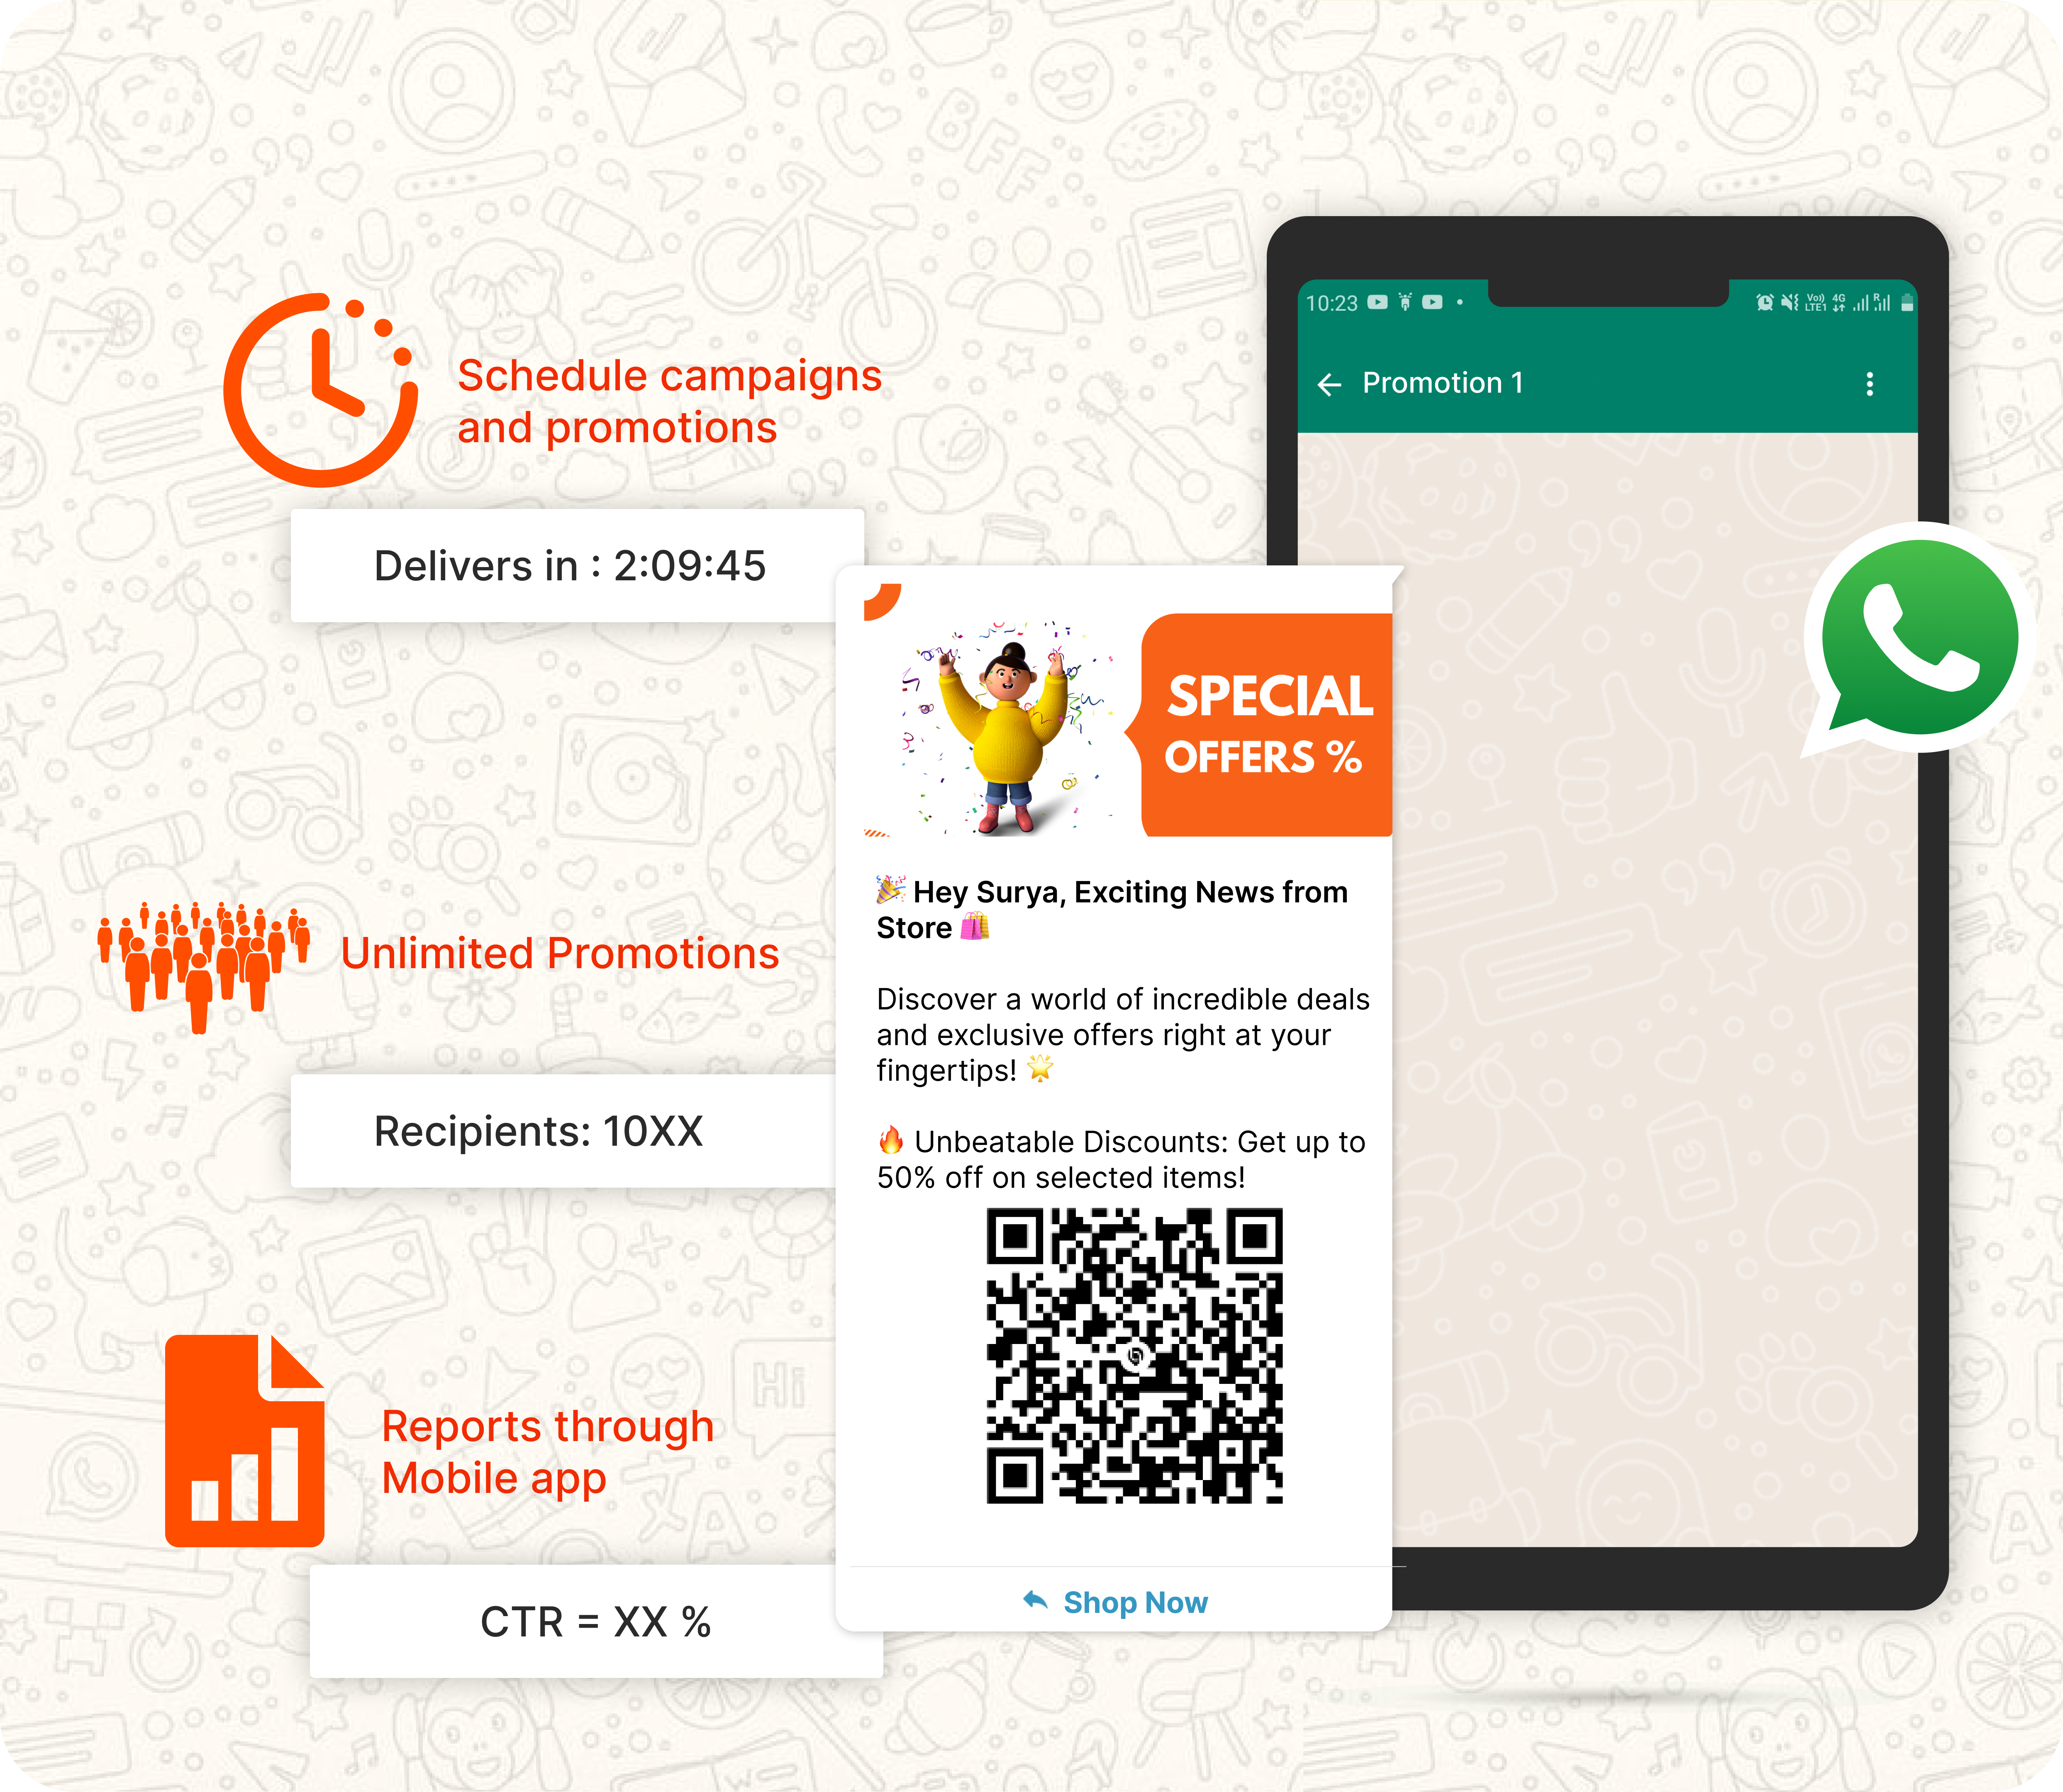 WhatsApp Marketing: The new way to reach your customers!